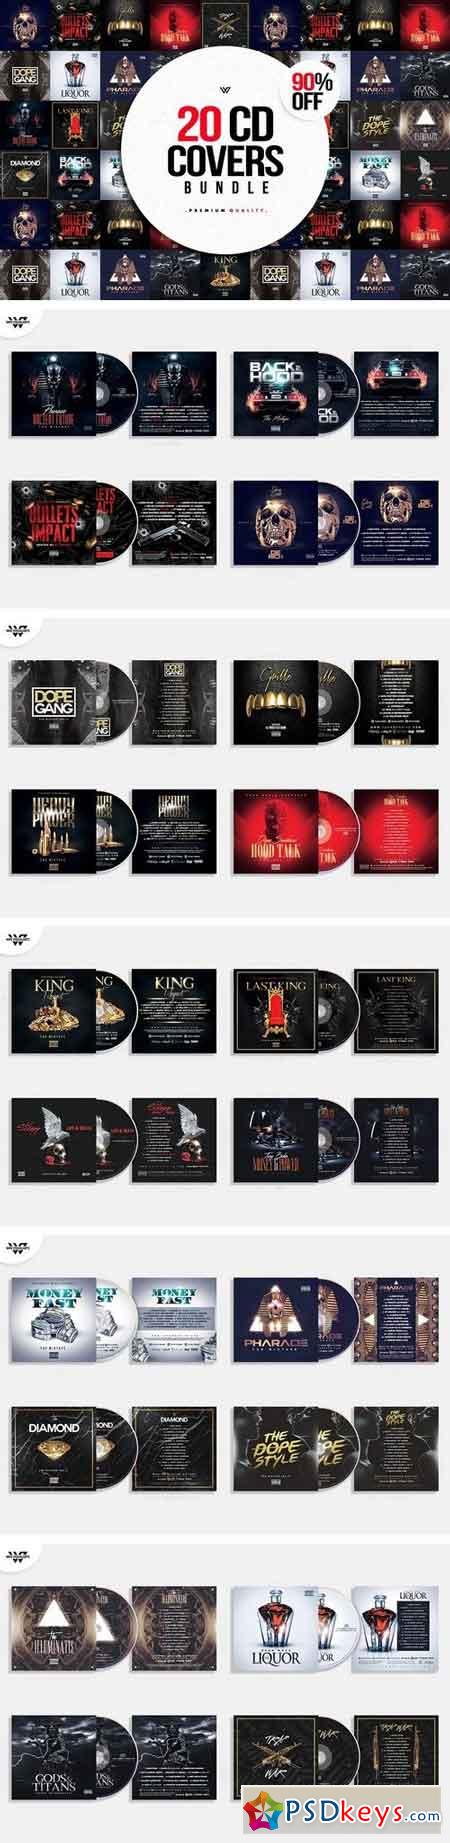 20 CD COVER TEMPLATES 1540286